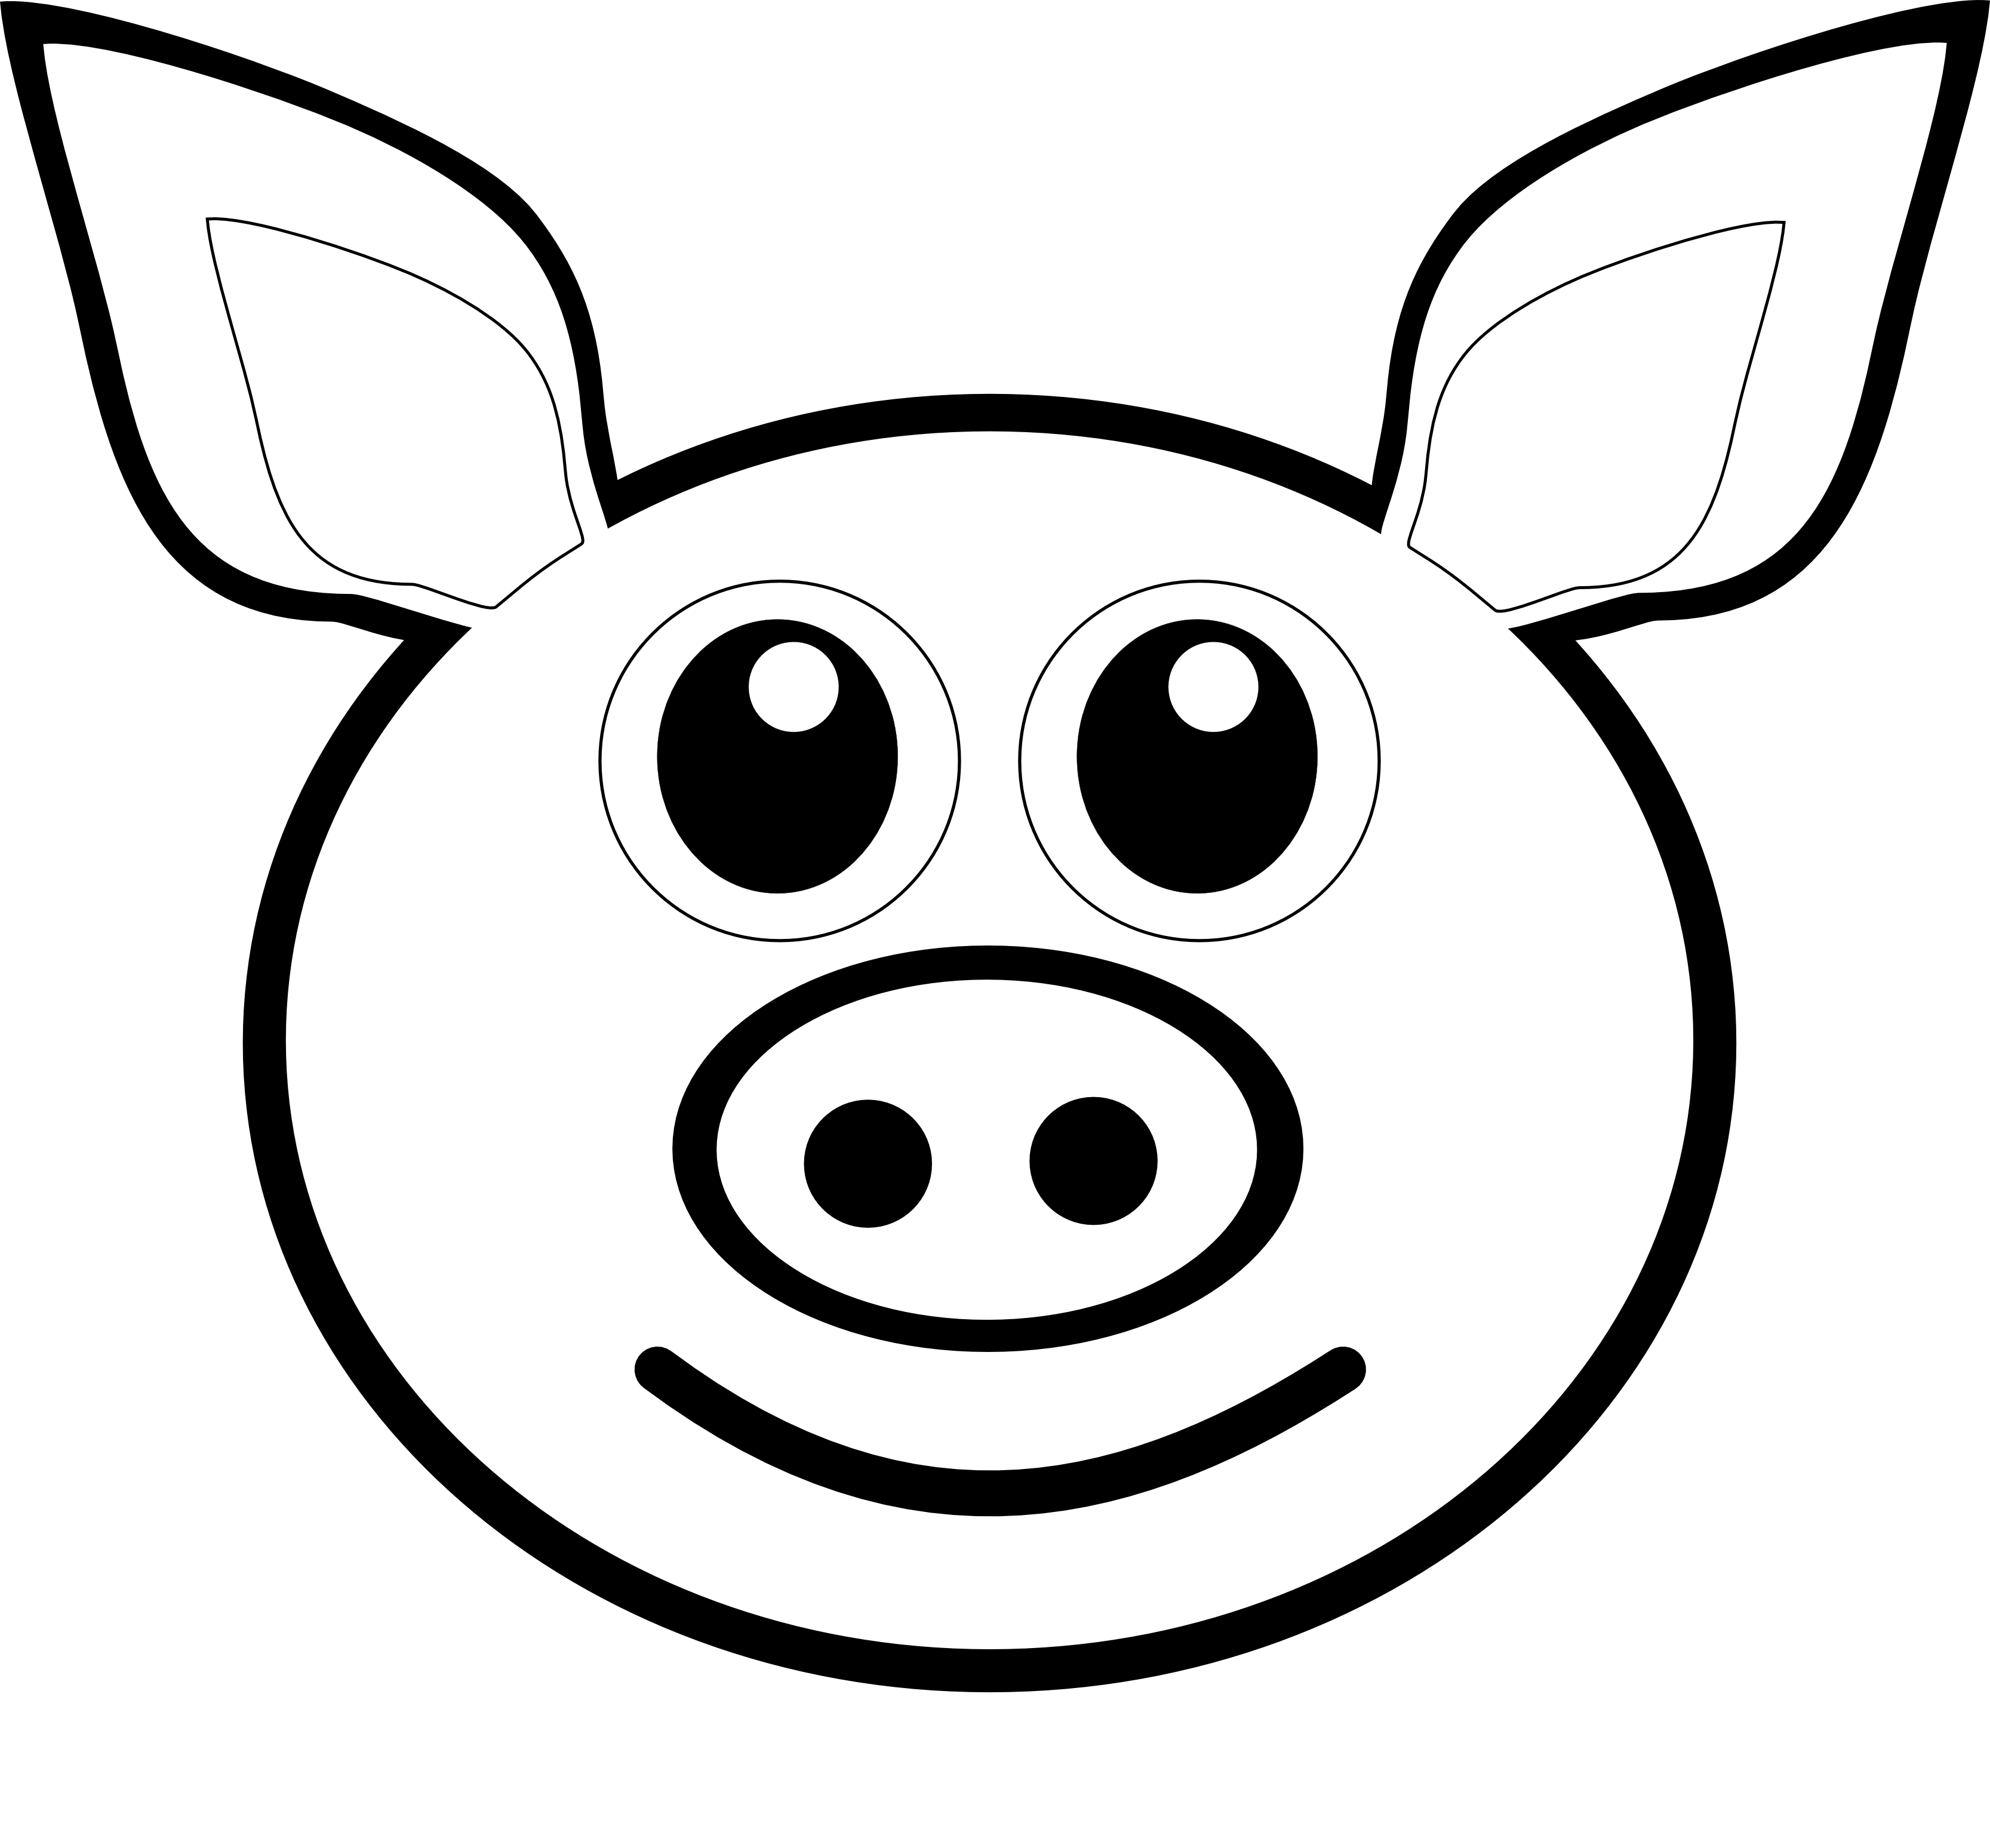 Pig Line Drawing - ClipArt Best